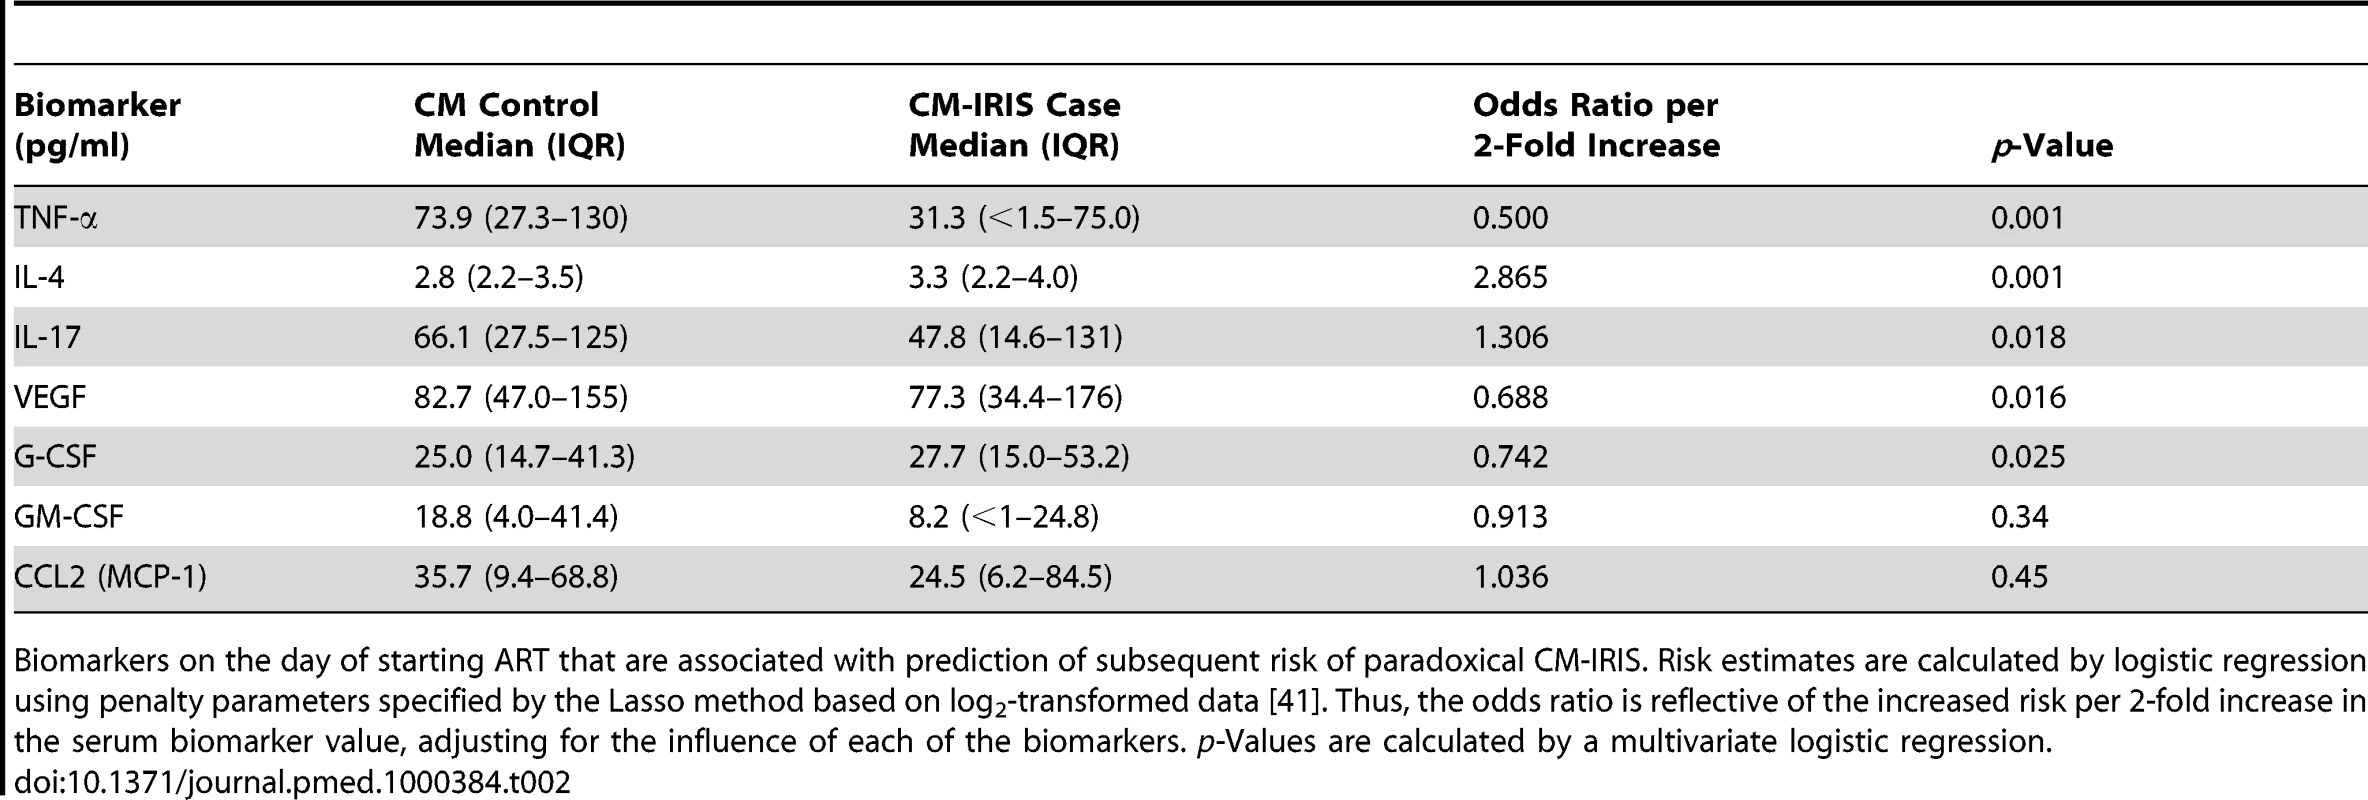 Pre-ART serum biomarkers associated with subsequent paradoxical cryptococcal IRIS.